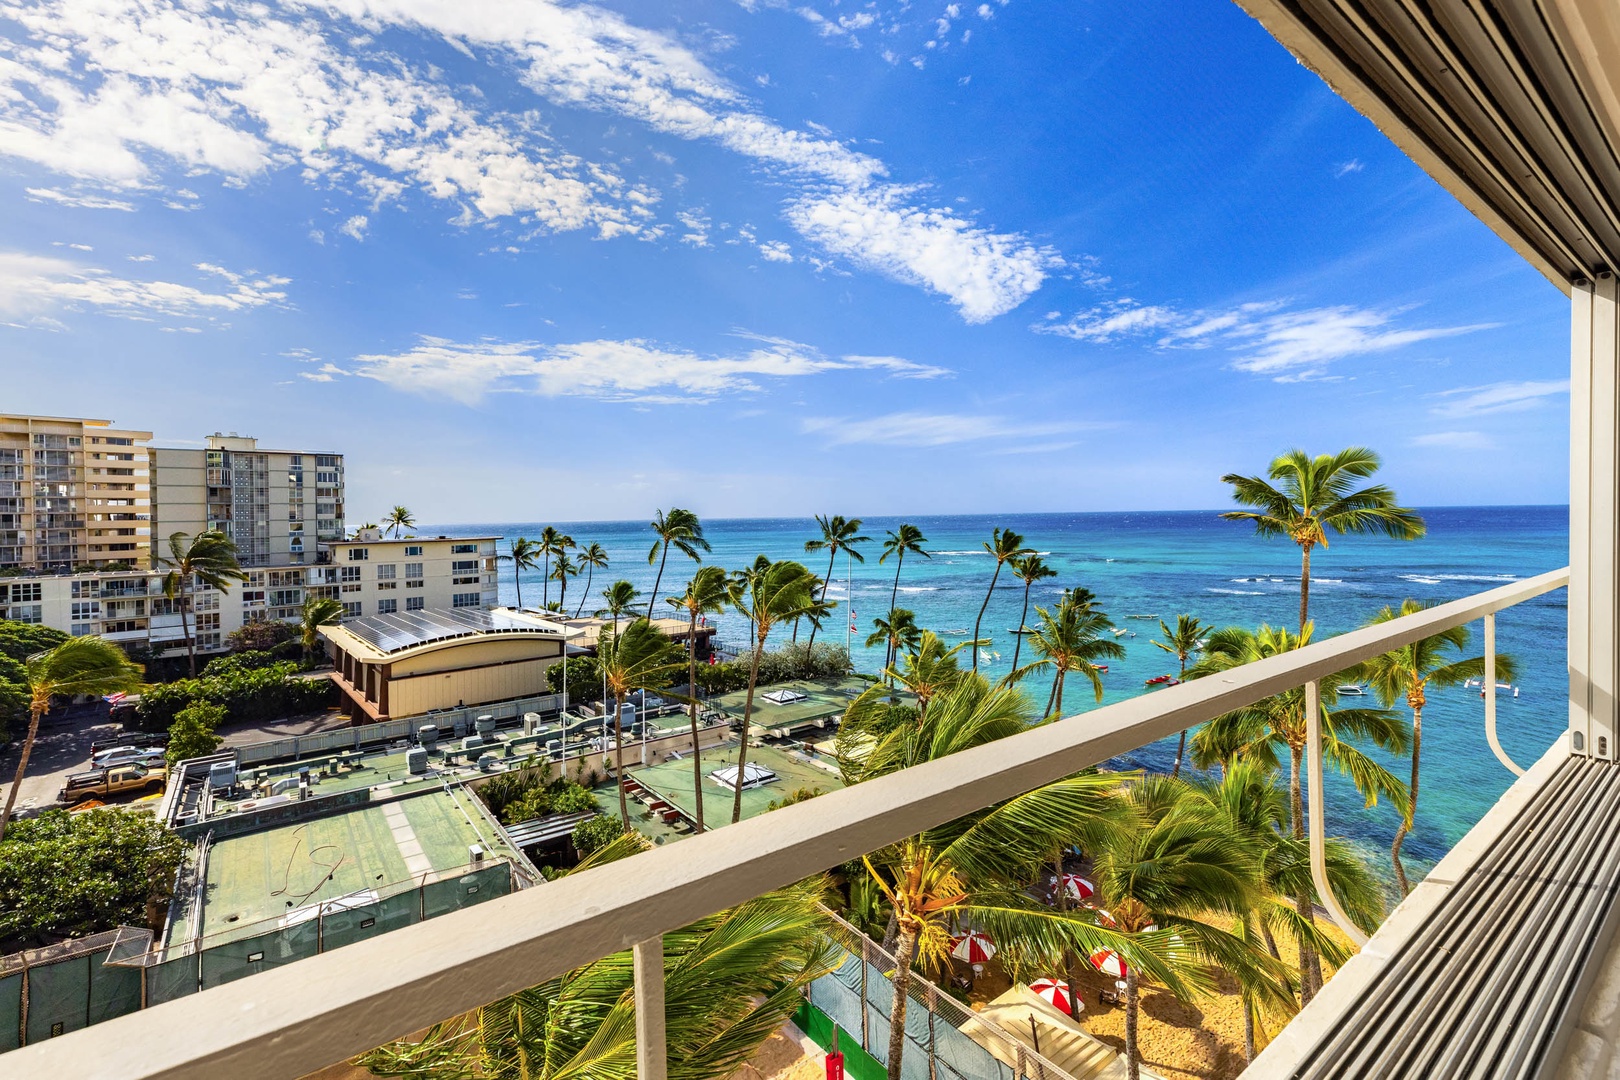 Honolulu Vacation Rentals, Colony Surf Getaway - Relaxing balcony offering expansive tropical views for a serene and exclusive getaway.